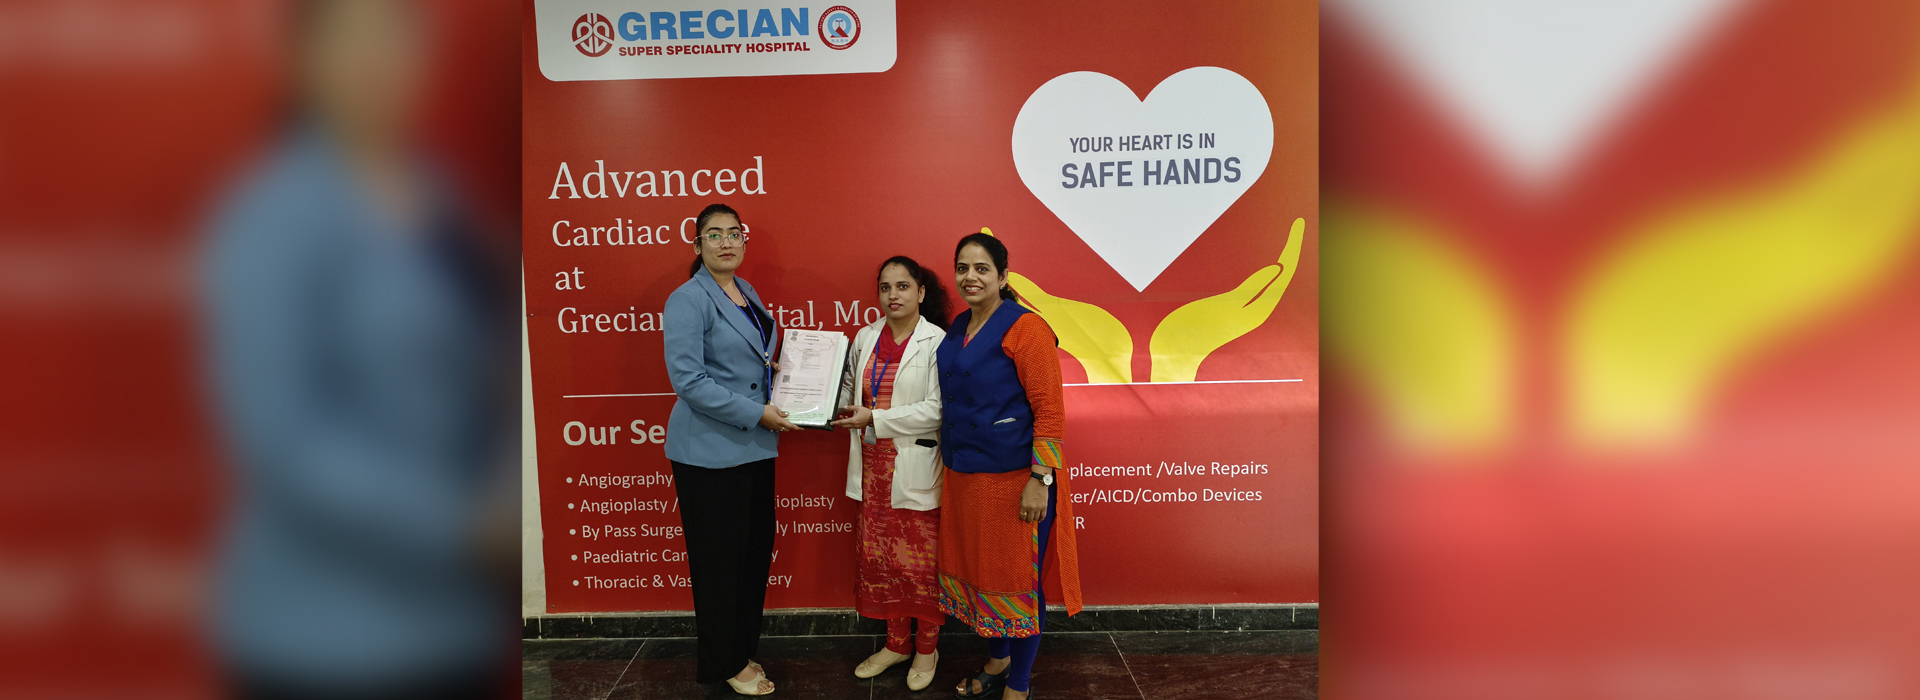 MOU with Grecian Super-Specialty Hospital 